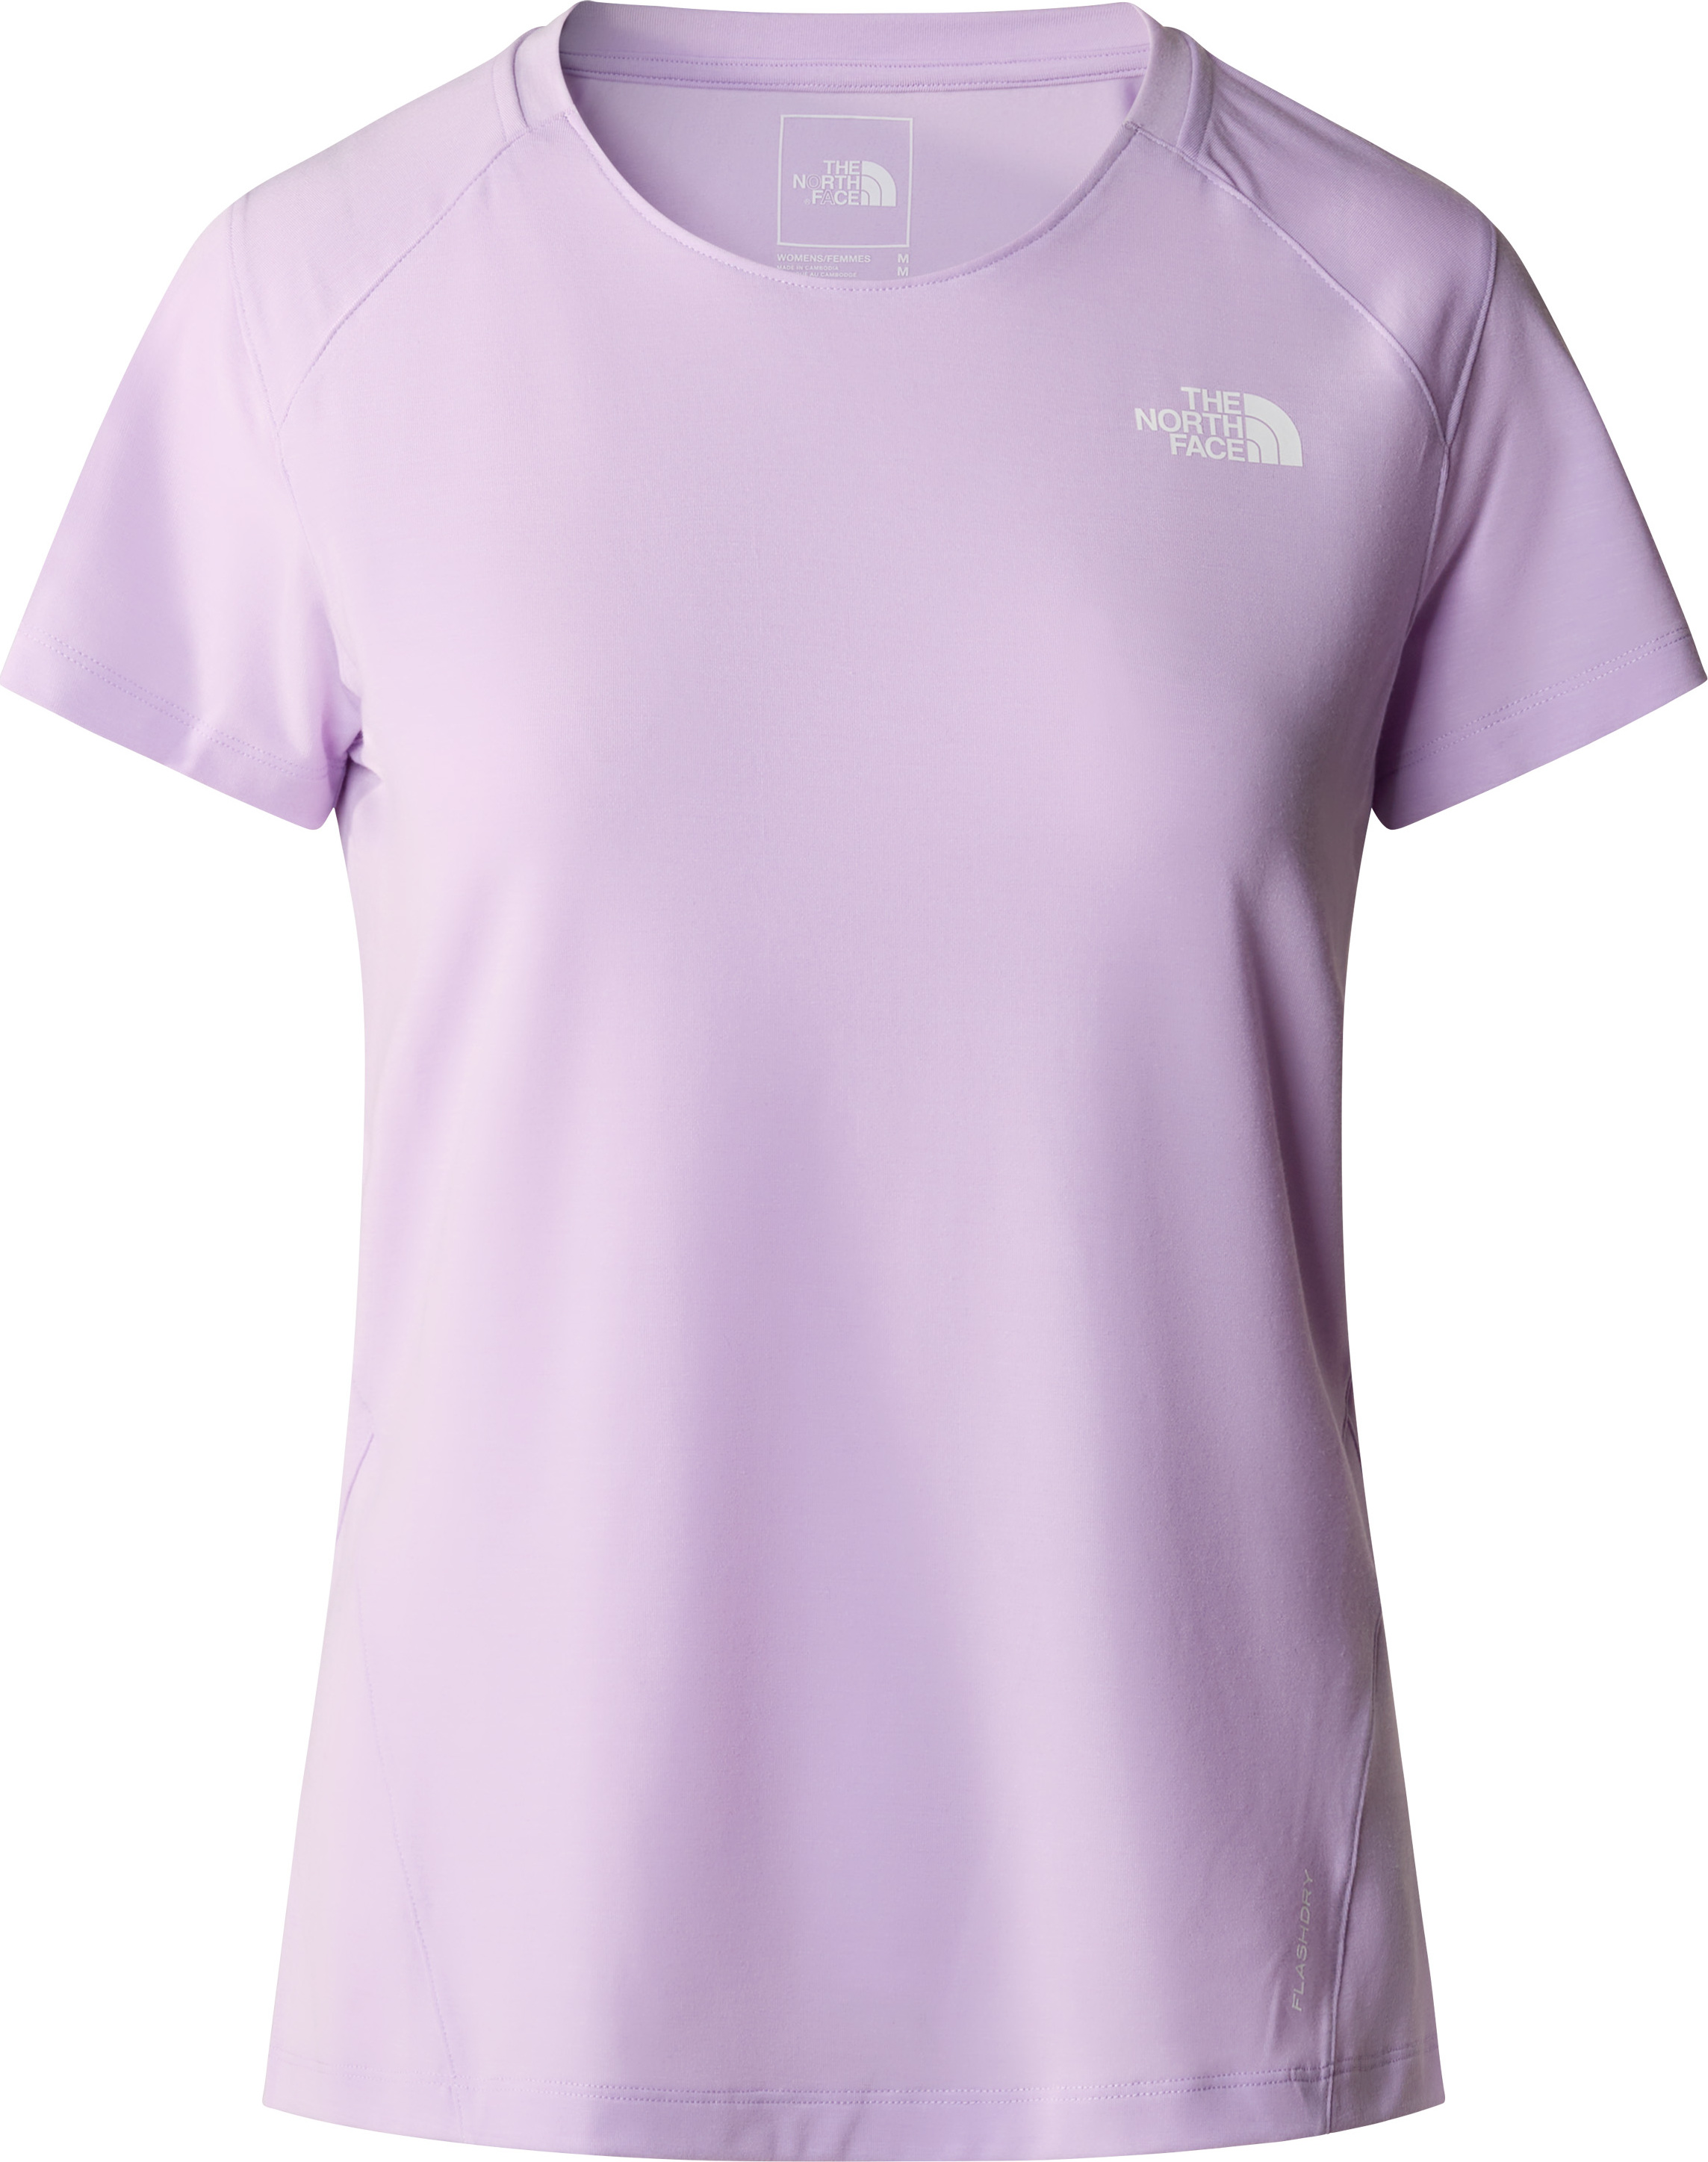 The North Face The North Face W Lightning Alpine S/S Tee Lite Lilac L, Lite Lilac